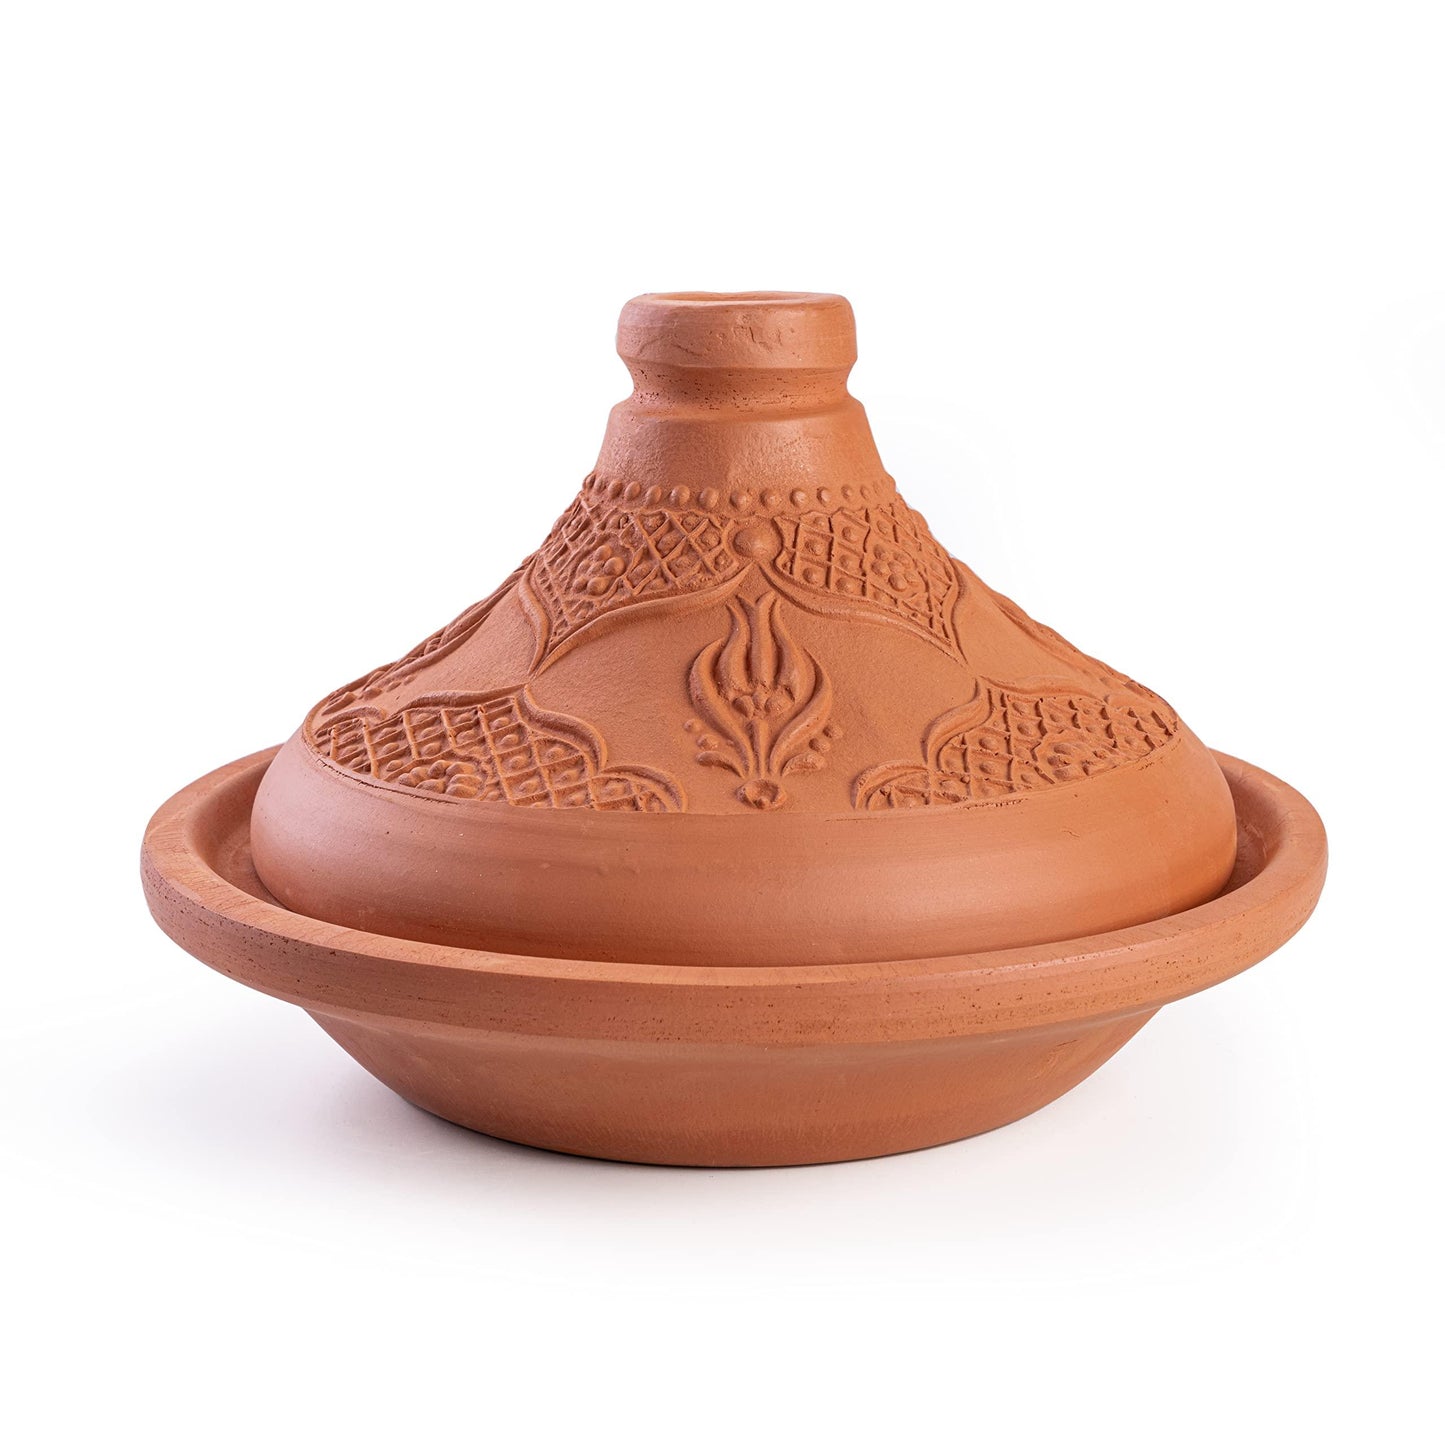 LUKSYOL Handmade Moroccan Tajin Set - Elevate Your Culinary Journey with Authentic Terracotta Clay Cooking Pots (2PCs, 8 x 4.7 in) for Moroccan, Indian, Mexican & Mediterranean Delights - CookCave